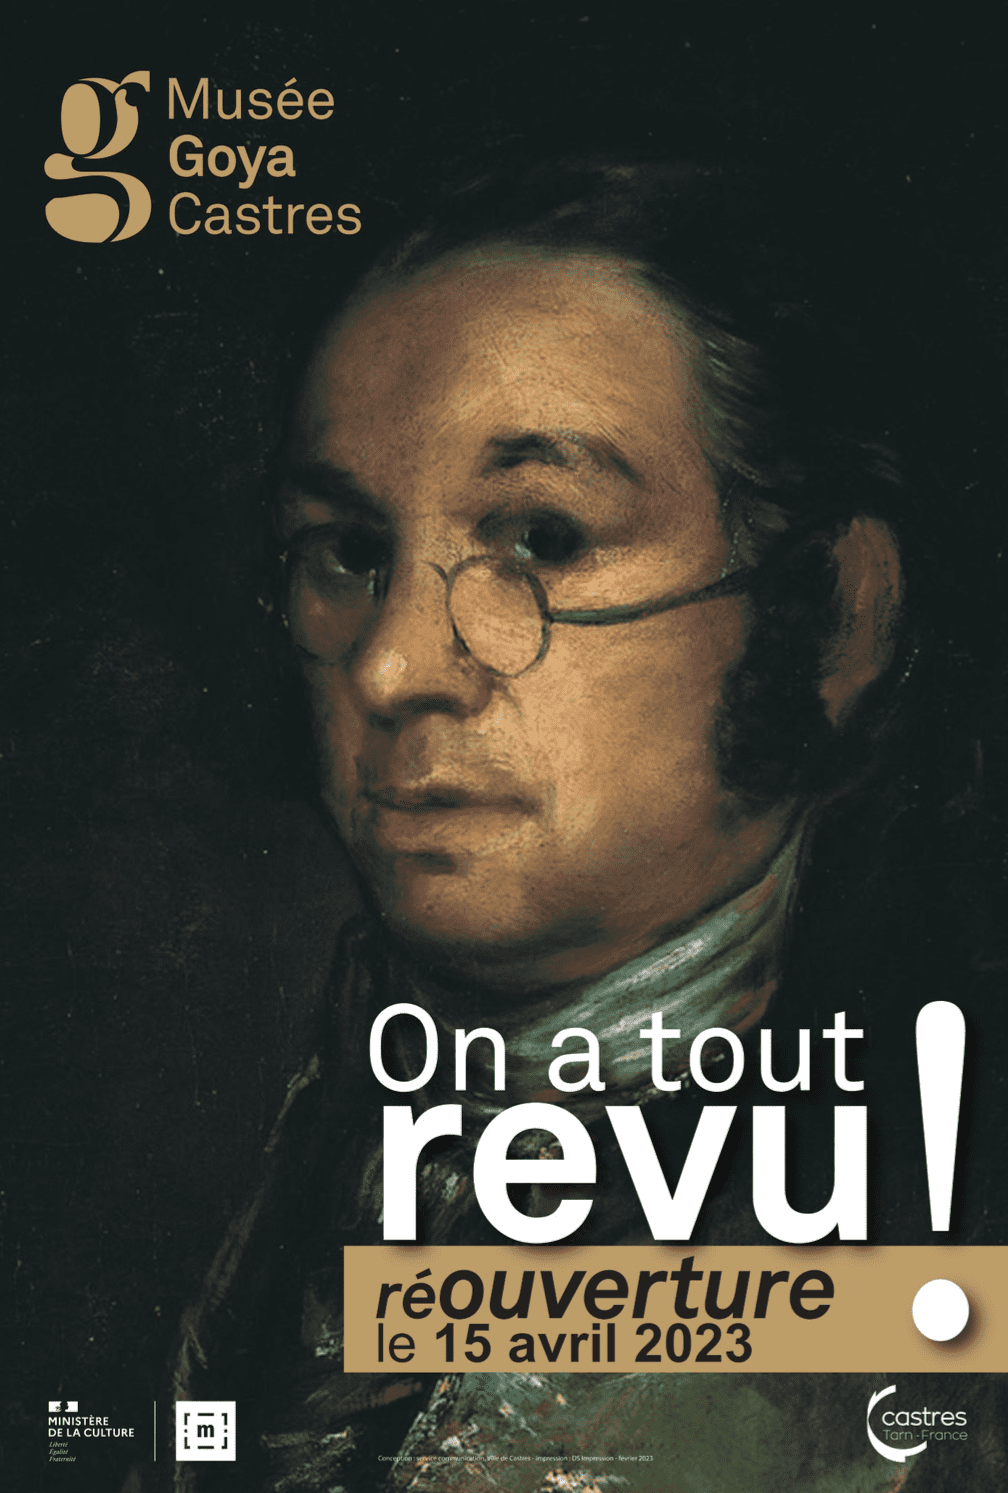 Musee Goya-On a tout revu-Reouverture le 15 avril 2023